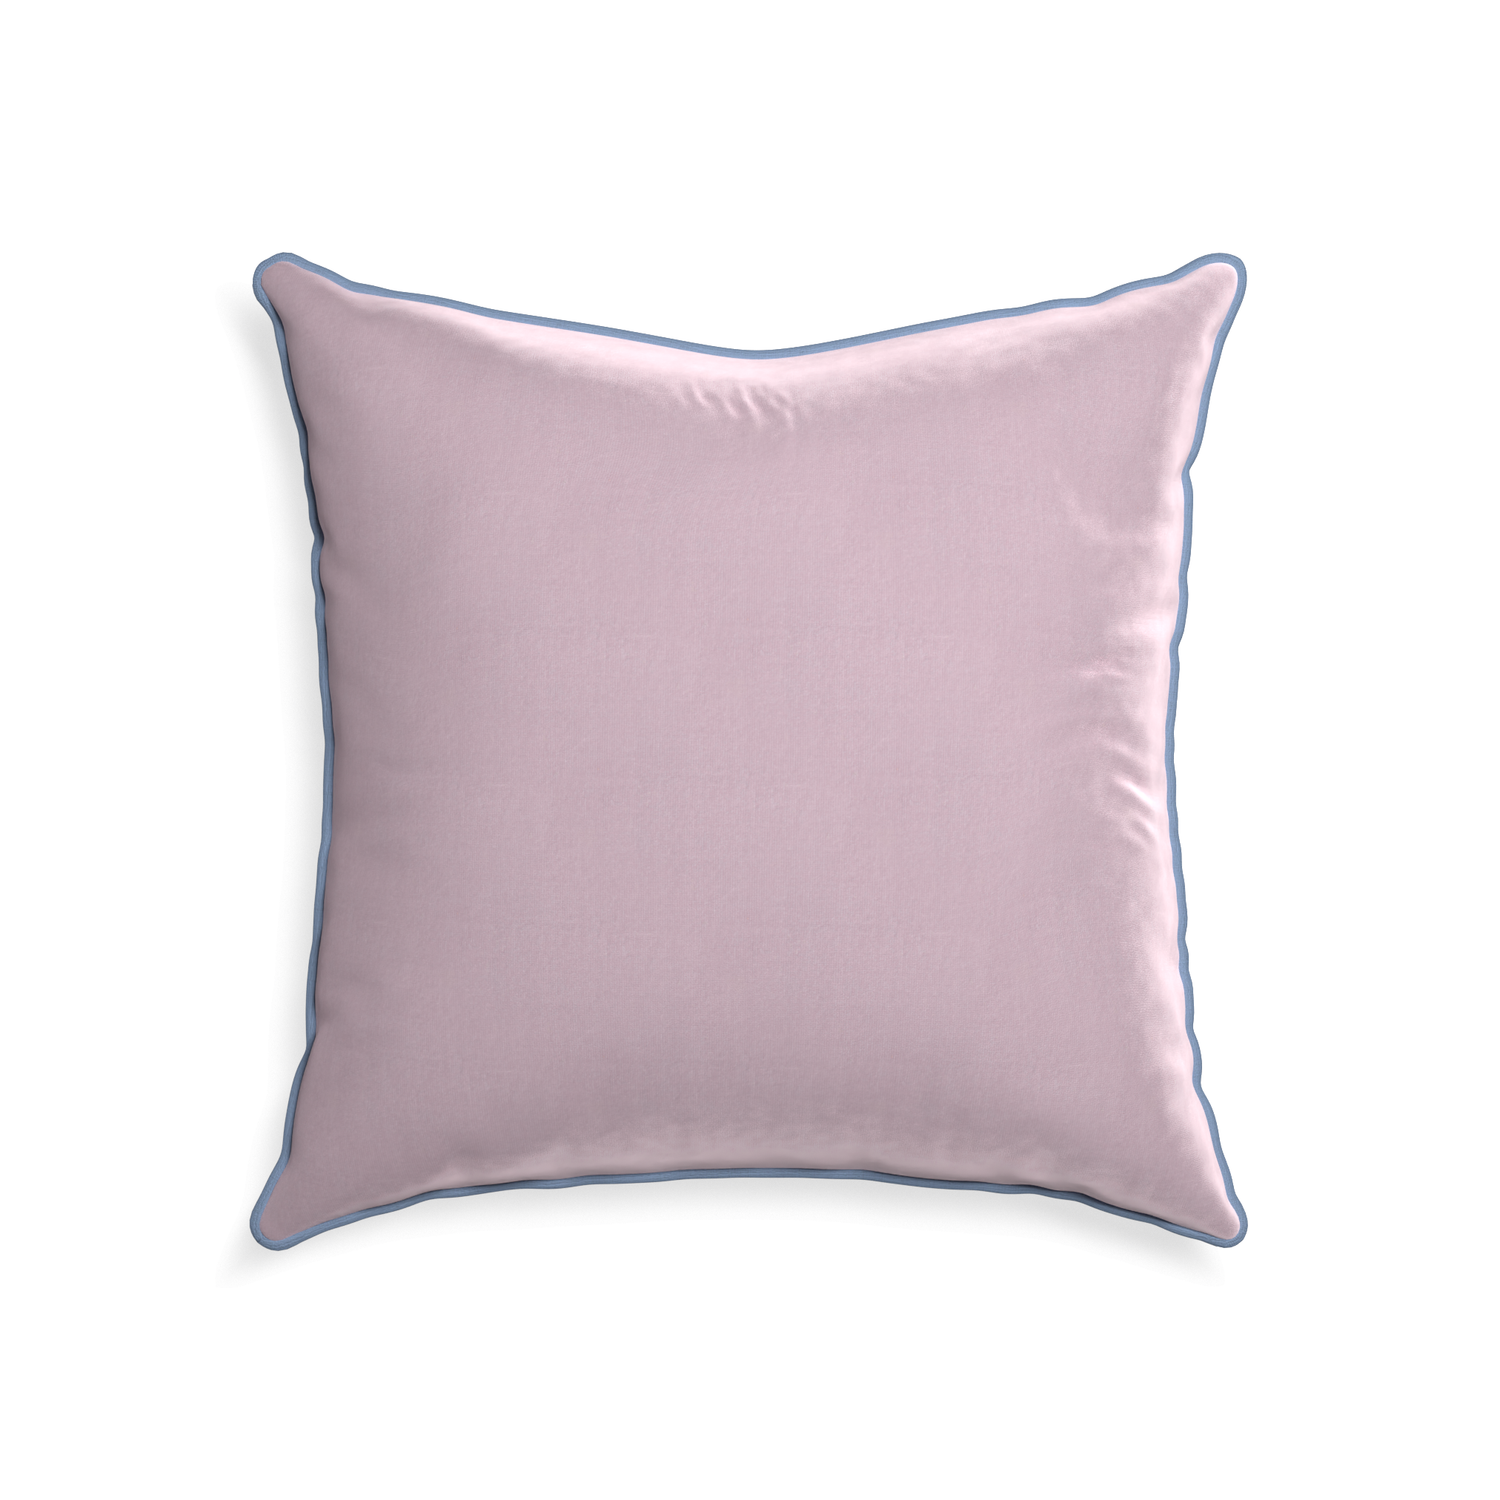 22-square lilac velvet custom lilacpillow with sky piping on white background